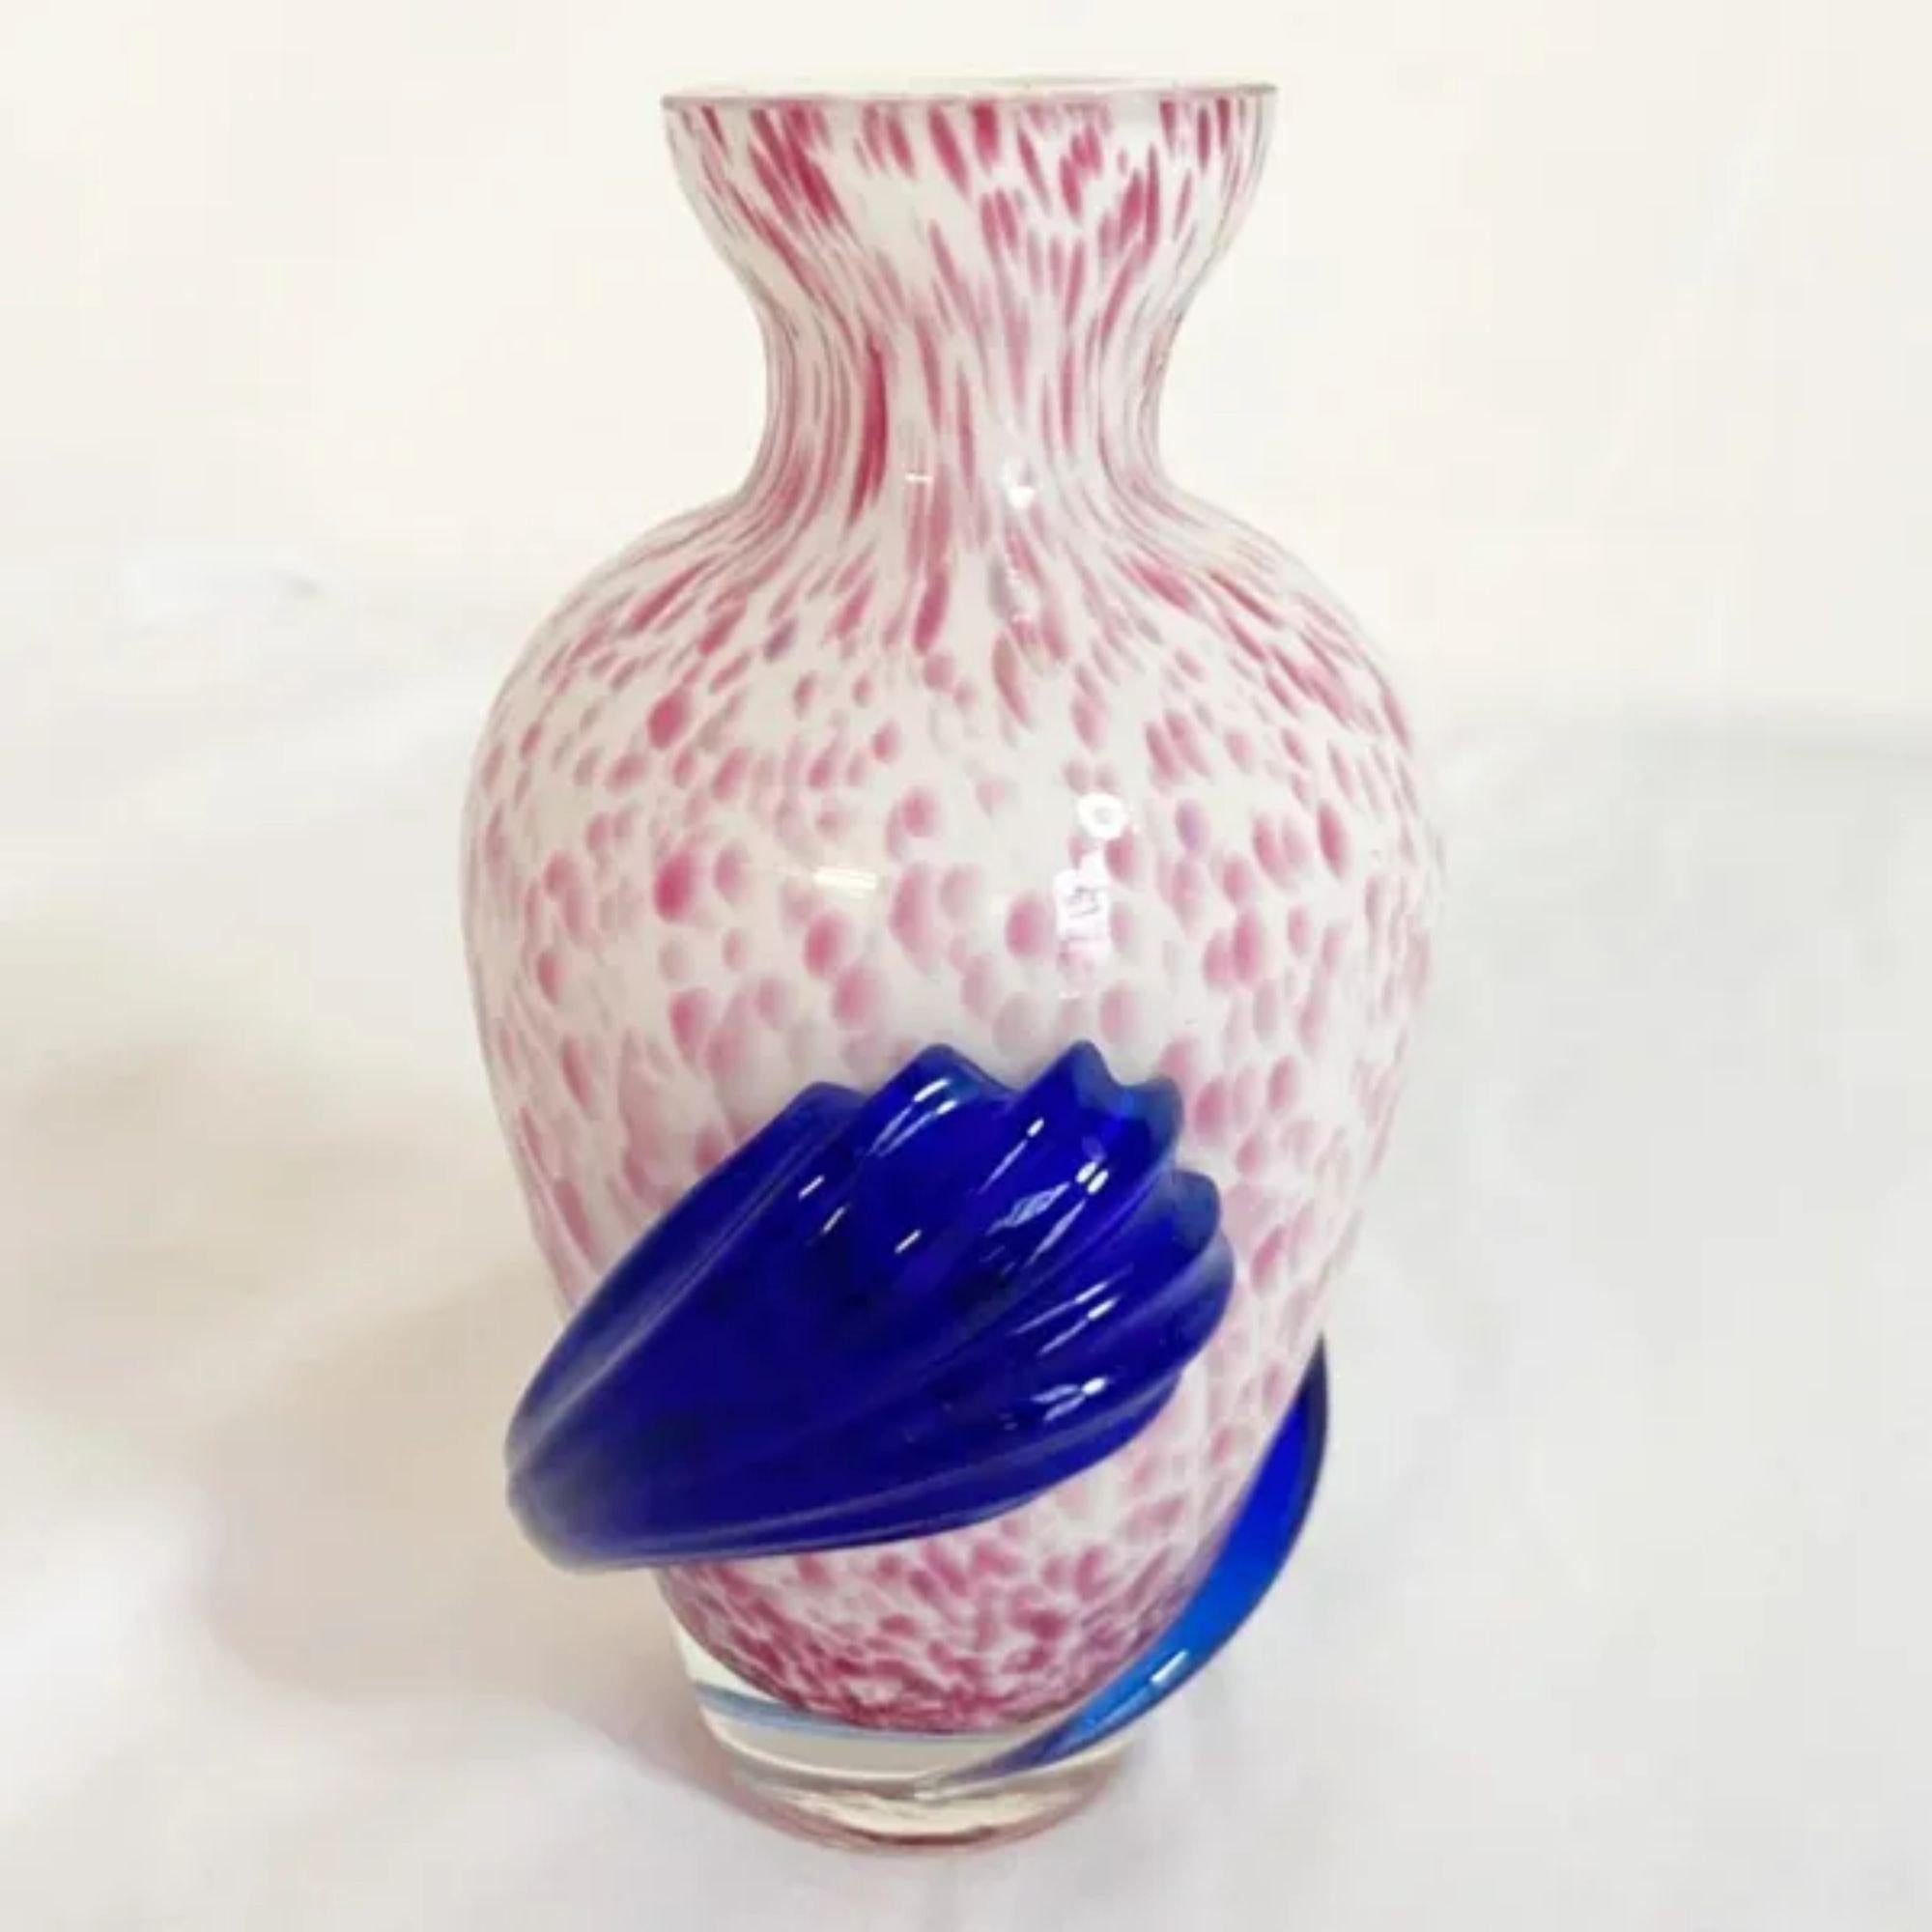 White and pink glass vase with blue snaking swirl

Additional information: 
Material: Glass
Color: Pink, White
Style: Vintage
Time Period: 1980s
Place of origin: Italy
Dimension: 3.5